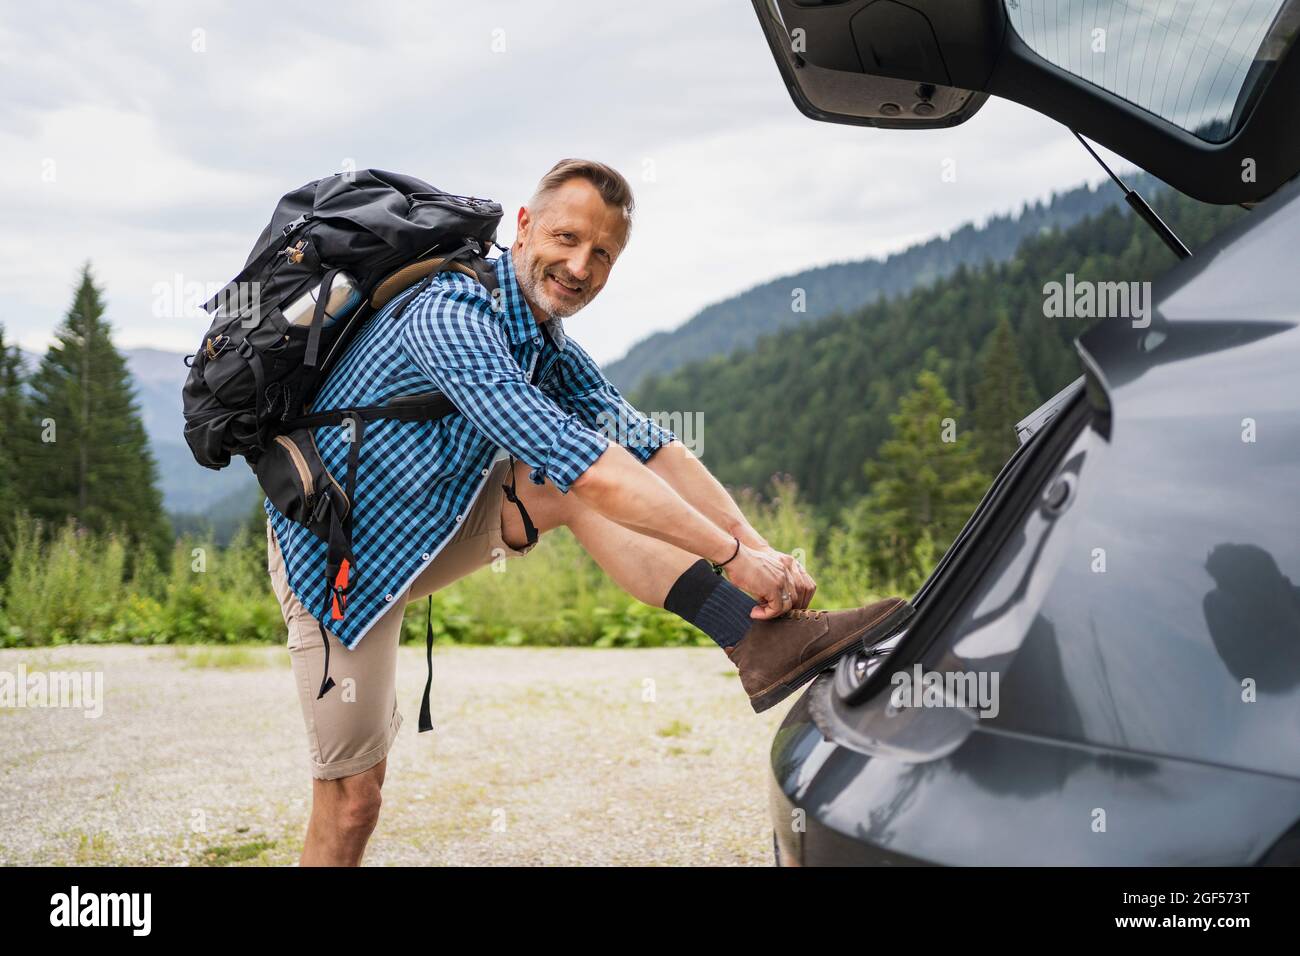 Male backpacker tying shoelace while leaning on car trunk Stock Photo